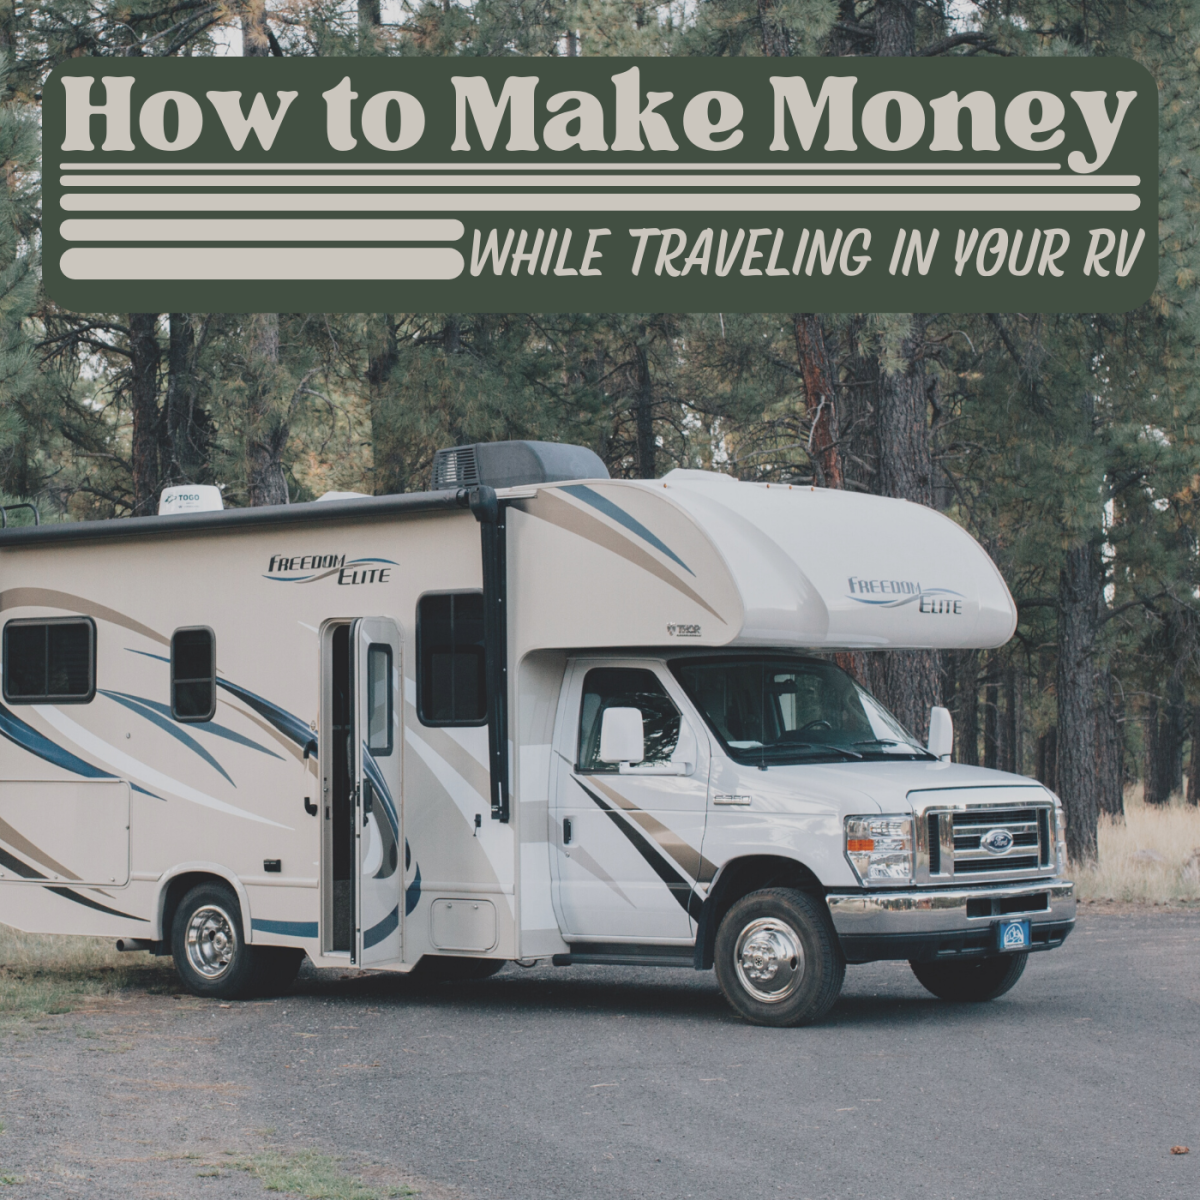 10 Ways to Make Money While Traveling in Your RV When You Retire